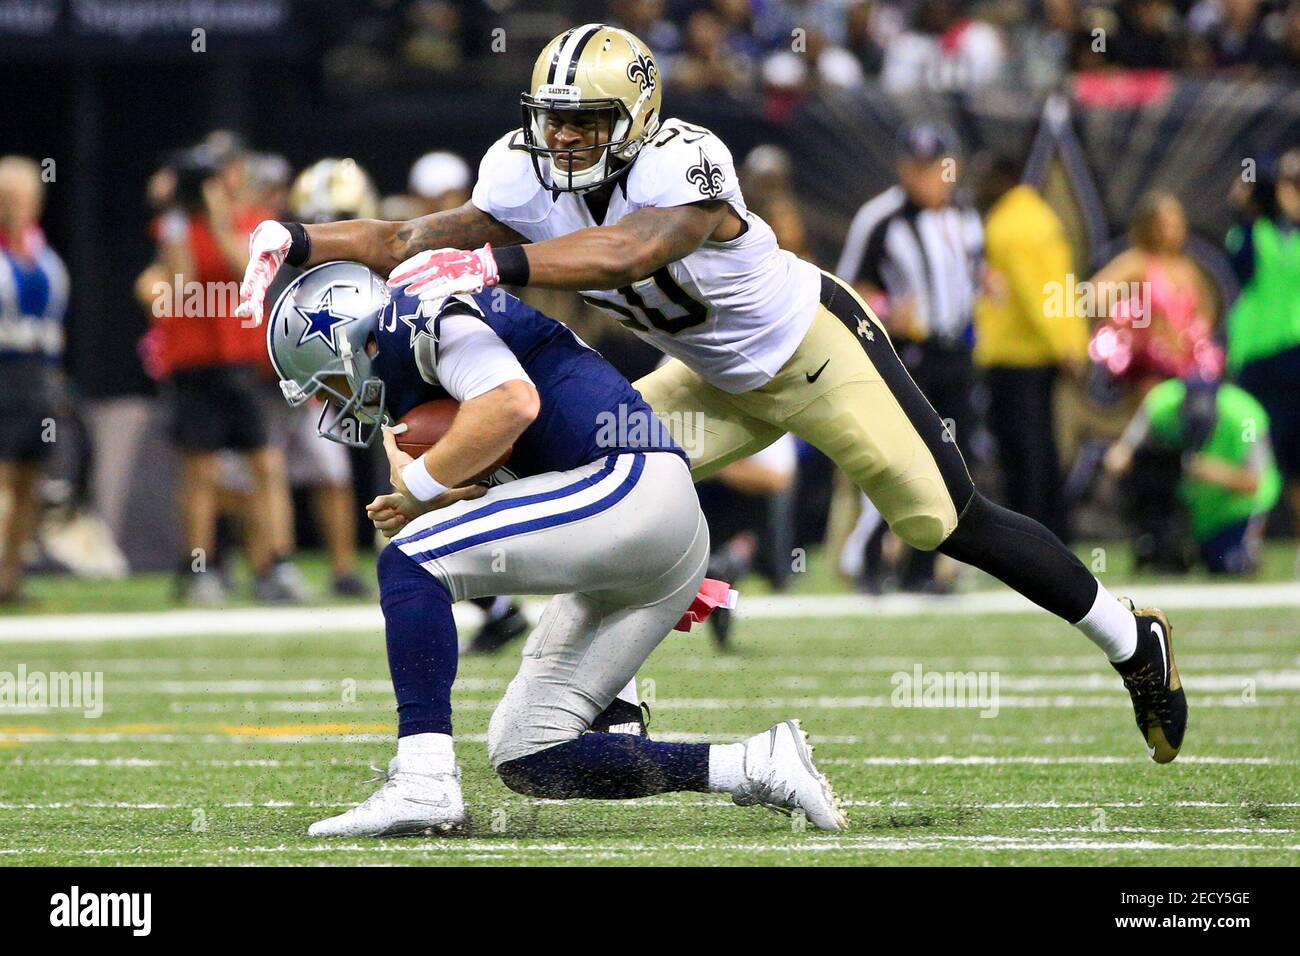 Oct 4, 2015; New Orleans, LA, USA; New Orleans Saints middle linebacker Stephone Anthony (50) sacks Dallas Cowboys quarterback Brandon Weeden (3) during the second quarter at the Mercedes-Benz Superdome. Mandatory Credit: Derick E. Hingle-USA TODAY Sports  / Reuters  Picture Supplied by Action Images   (TAGS: Sport American Football NFL) *** Local Caption *** 2015-10-05T021720Z 1104858449 NOCID RTRMADP 3 NFL-DALLAS-COWBOYS-AT-NEW-ORLEANS-SAINTS.JPG Stock Photo